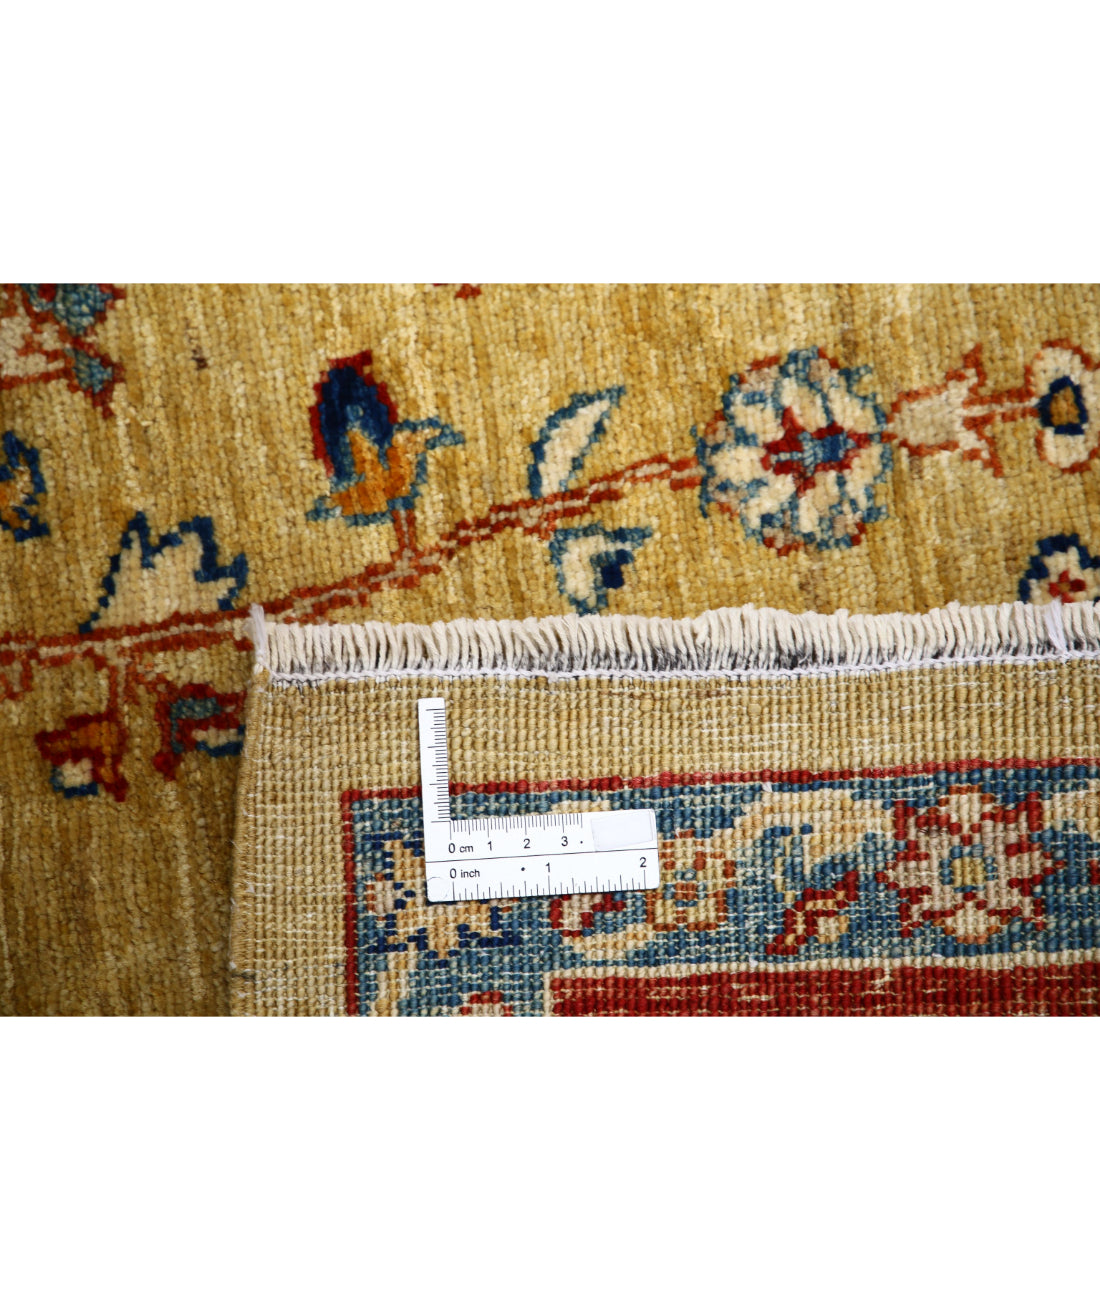 Hand Knotted Bakshaish Wool Rug - 5'6'' x 8'4'' 5'6'' x 8'4'' (165 X 250) / Gold / Red